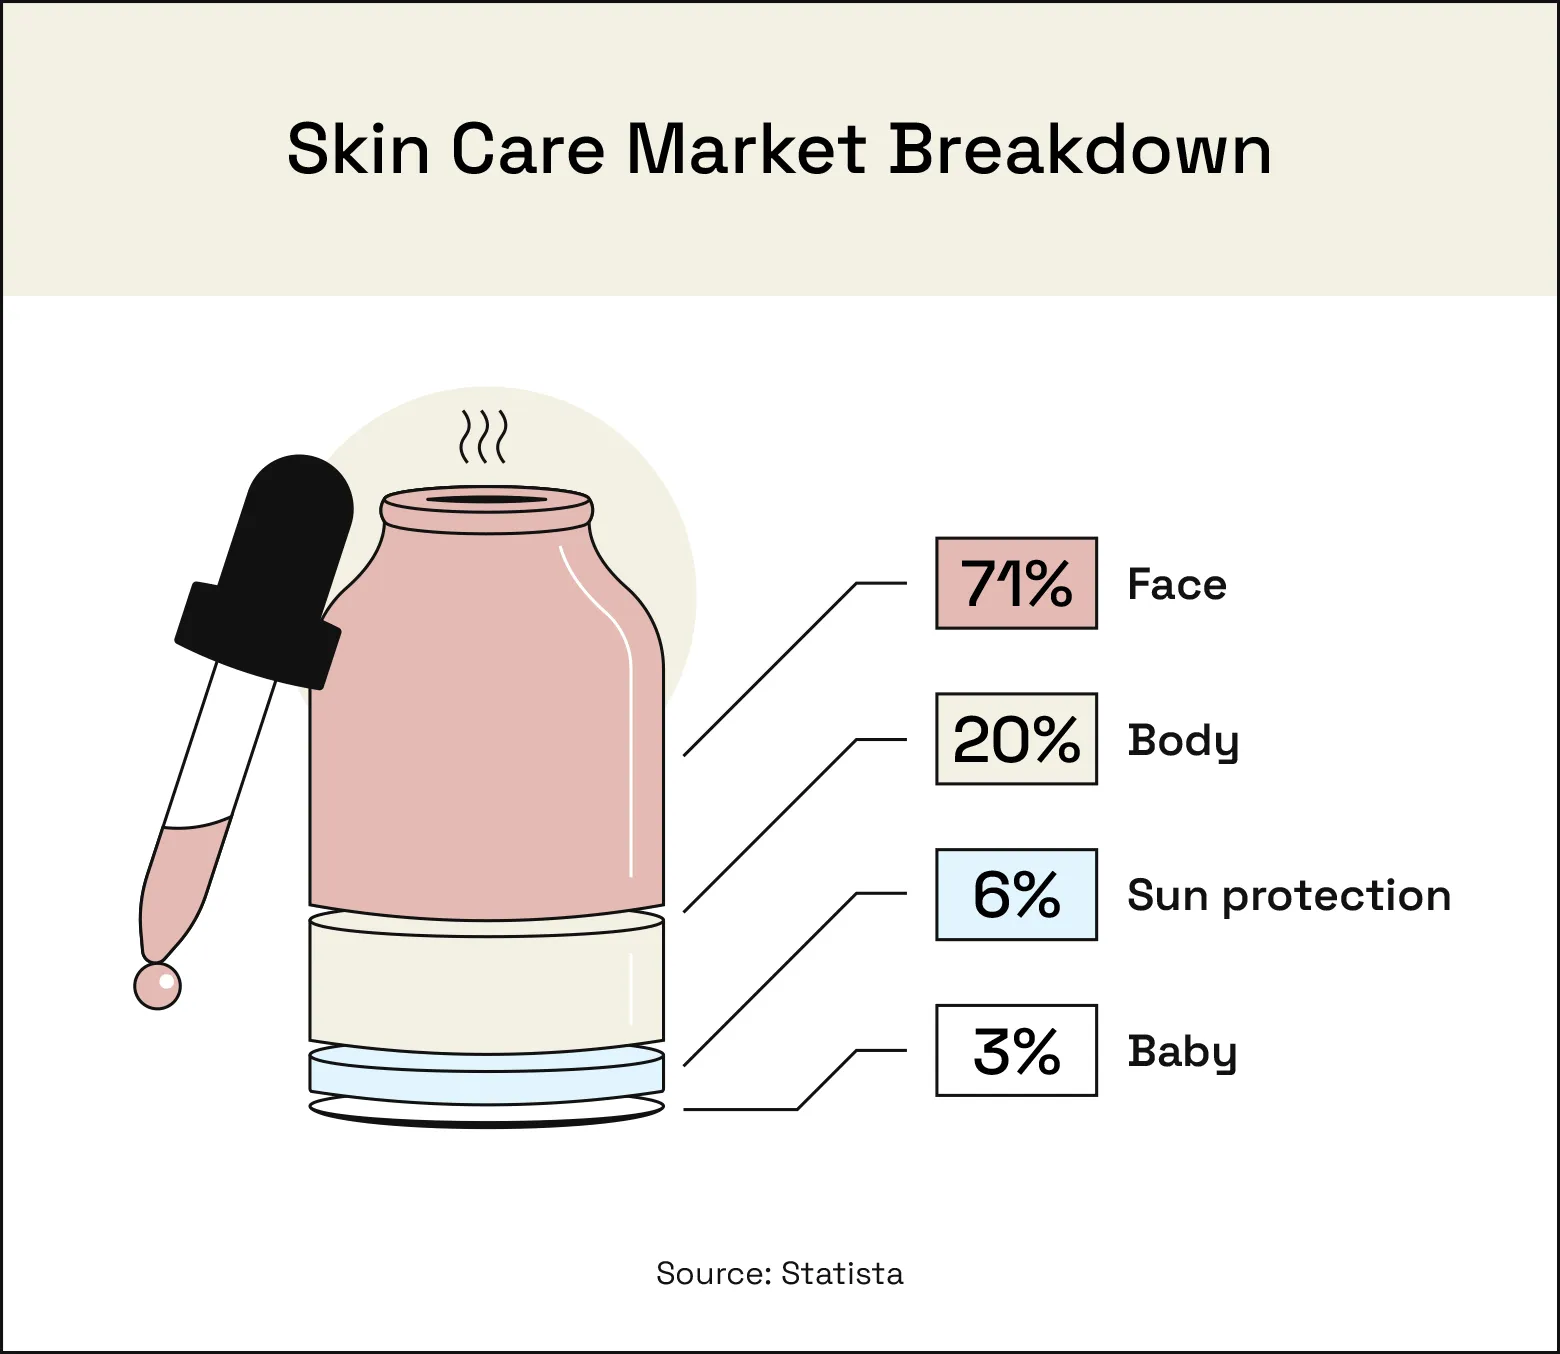 The skin care market is made up of 71% face skin care, 20% body, 6% sun protection and 3% baby.